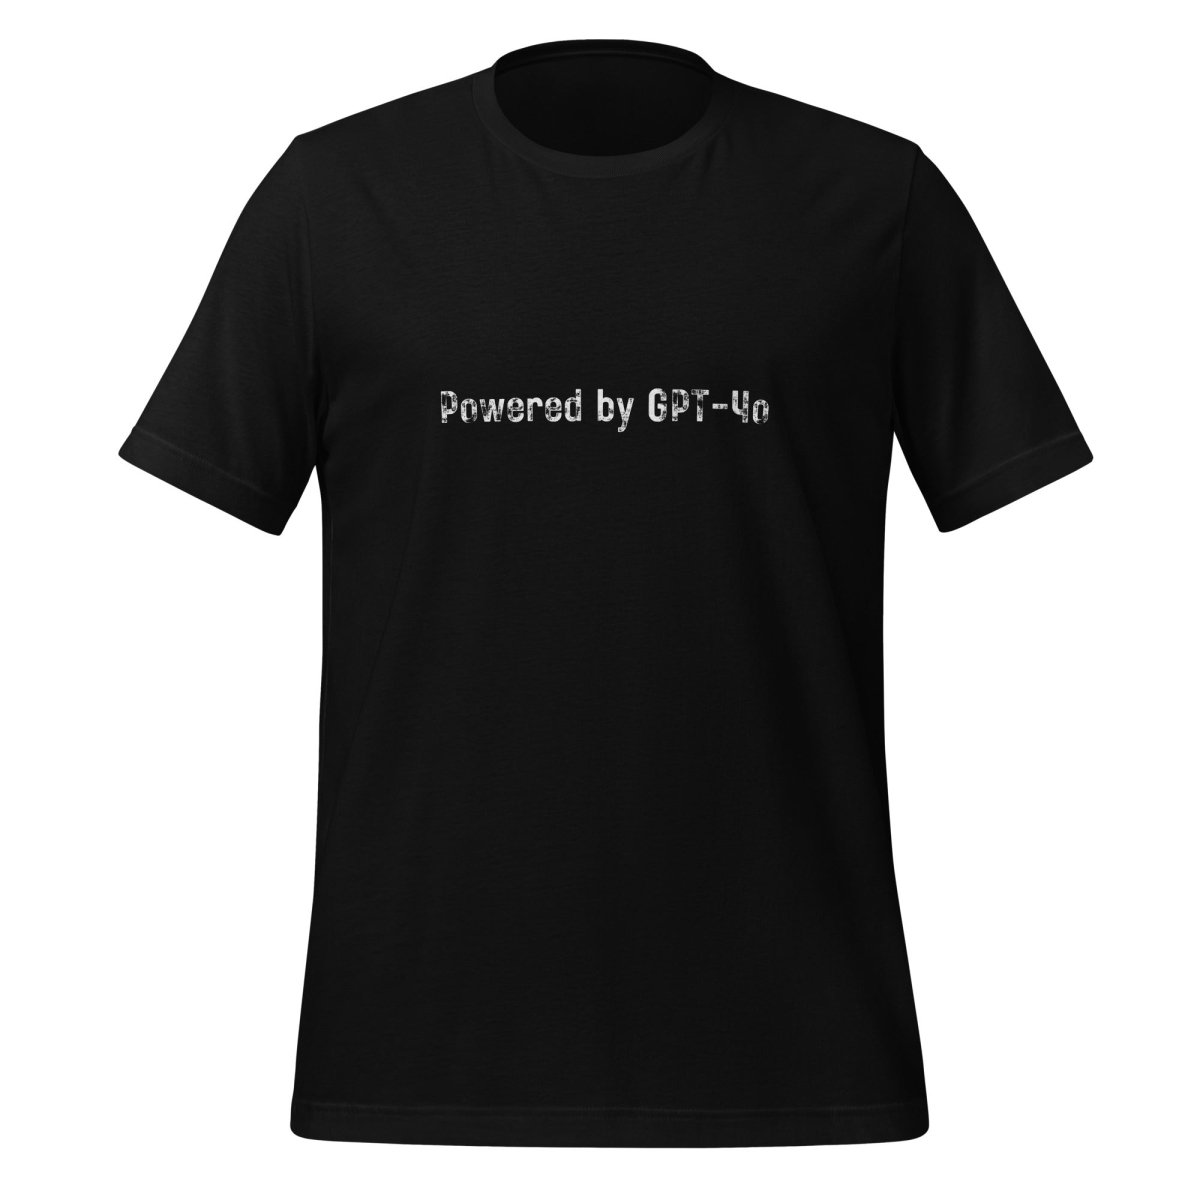 Powered by GPT - 4o T - Shirt 2 (unisex) - Black - AI Store